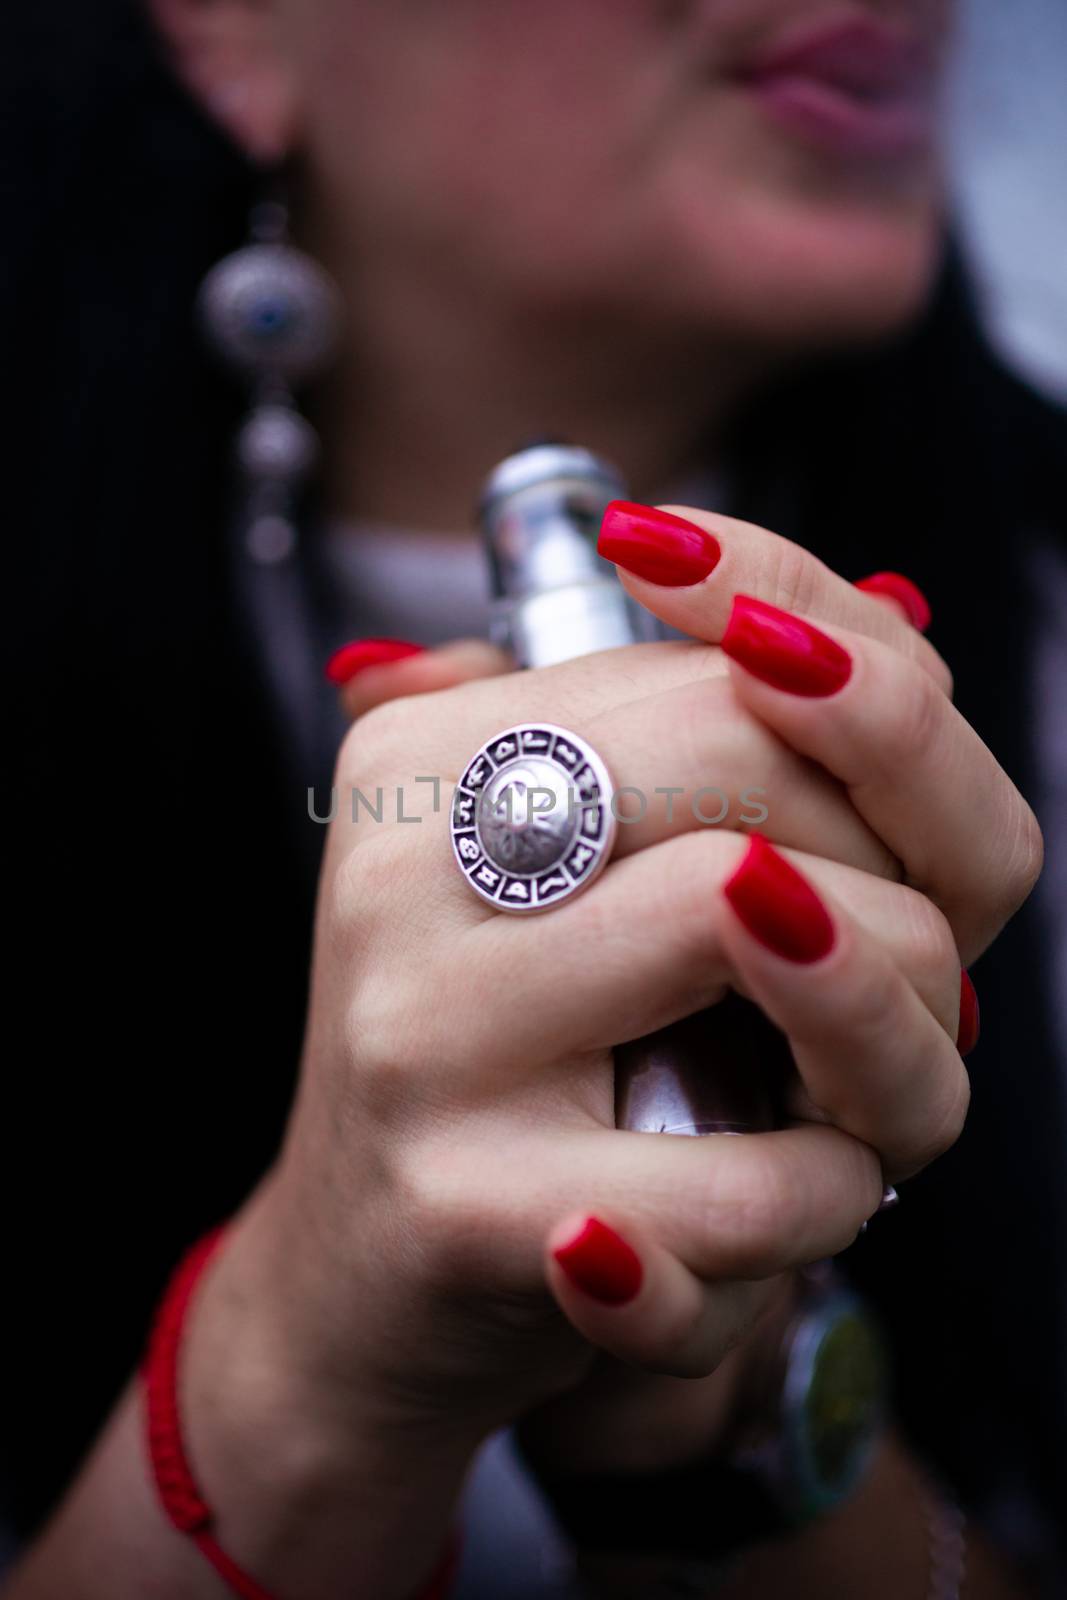 Caucasian woman with red nails manicure and antique ring on finger holds small vape. Smoking alternative vay. Life without cigarettes. Woman-vaper. Small e-cigarette. by alexsdriver